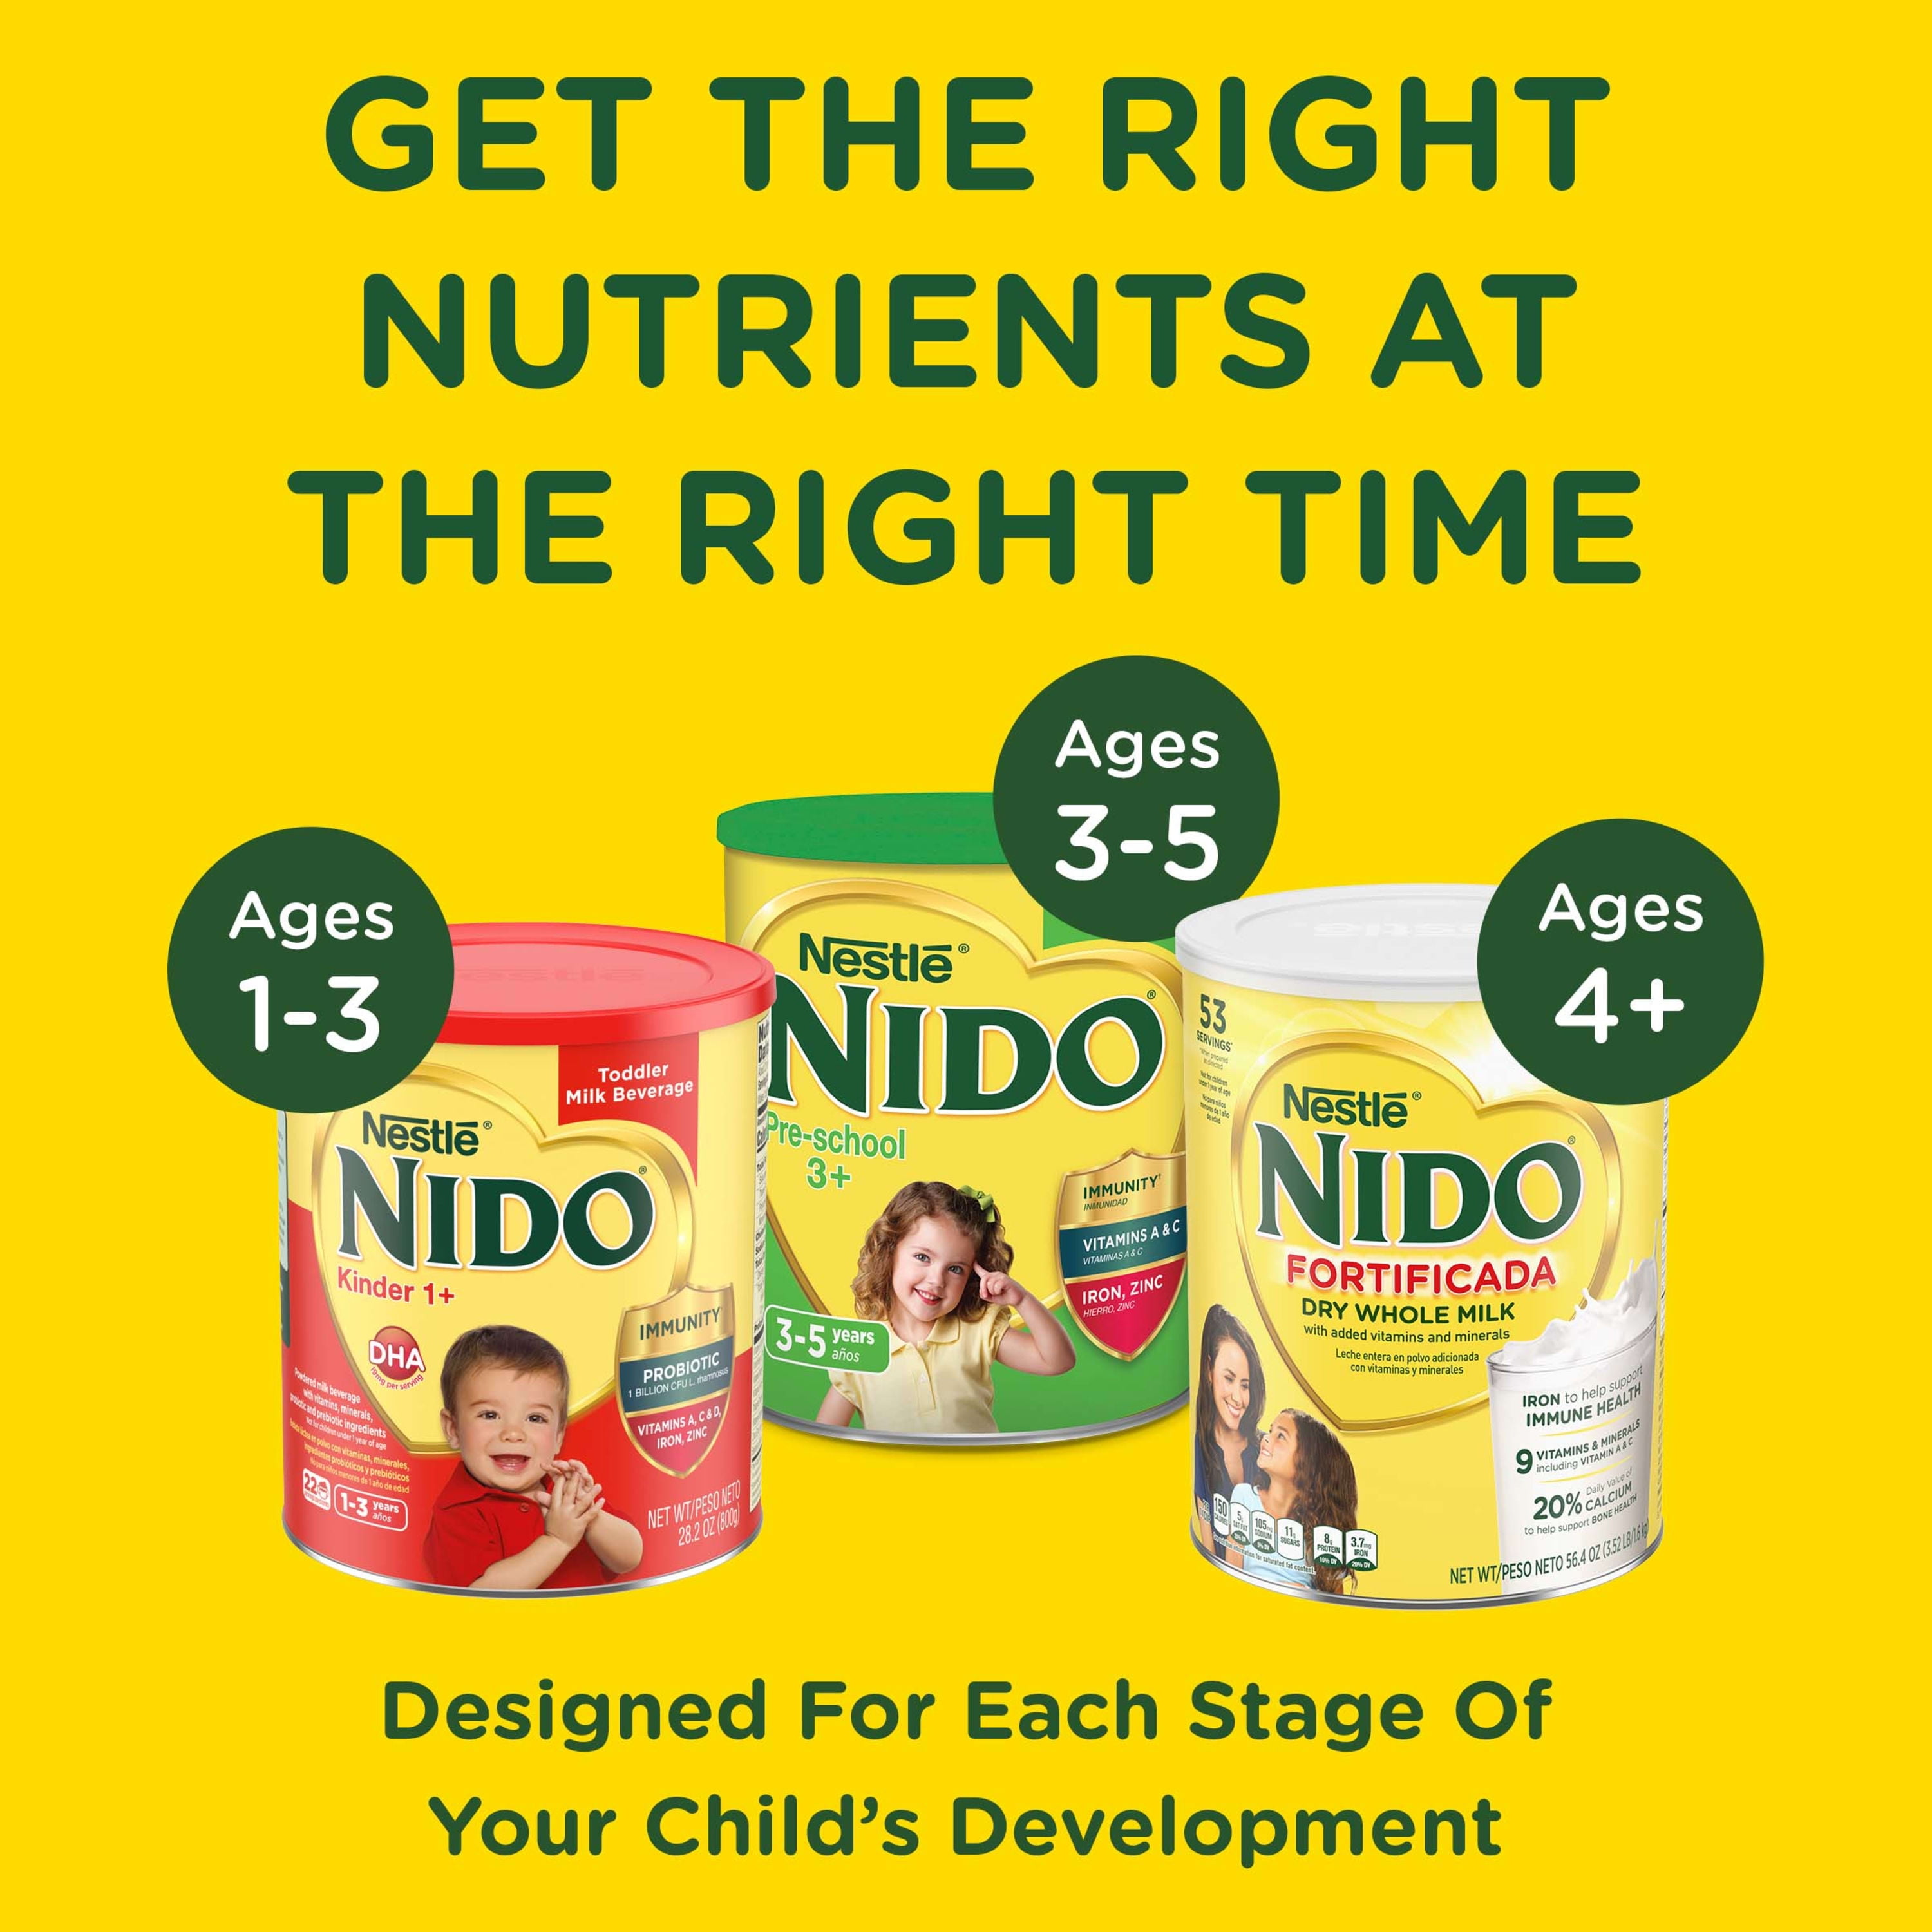 NIDO® Fortificada Dry Whole Milk Powdered Drink Mix, 3.52 lb - Food 4 Less